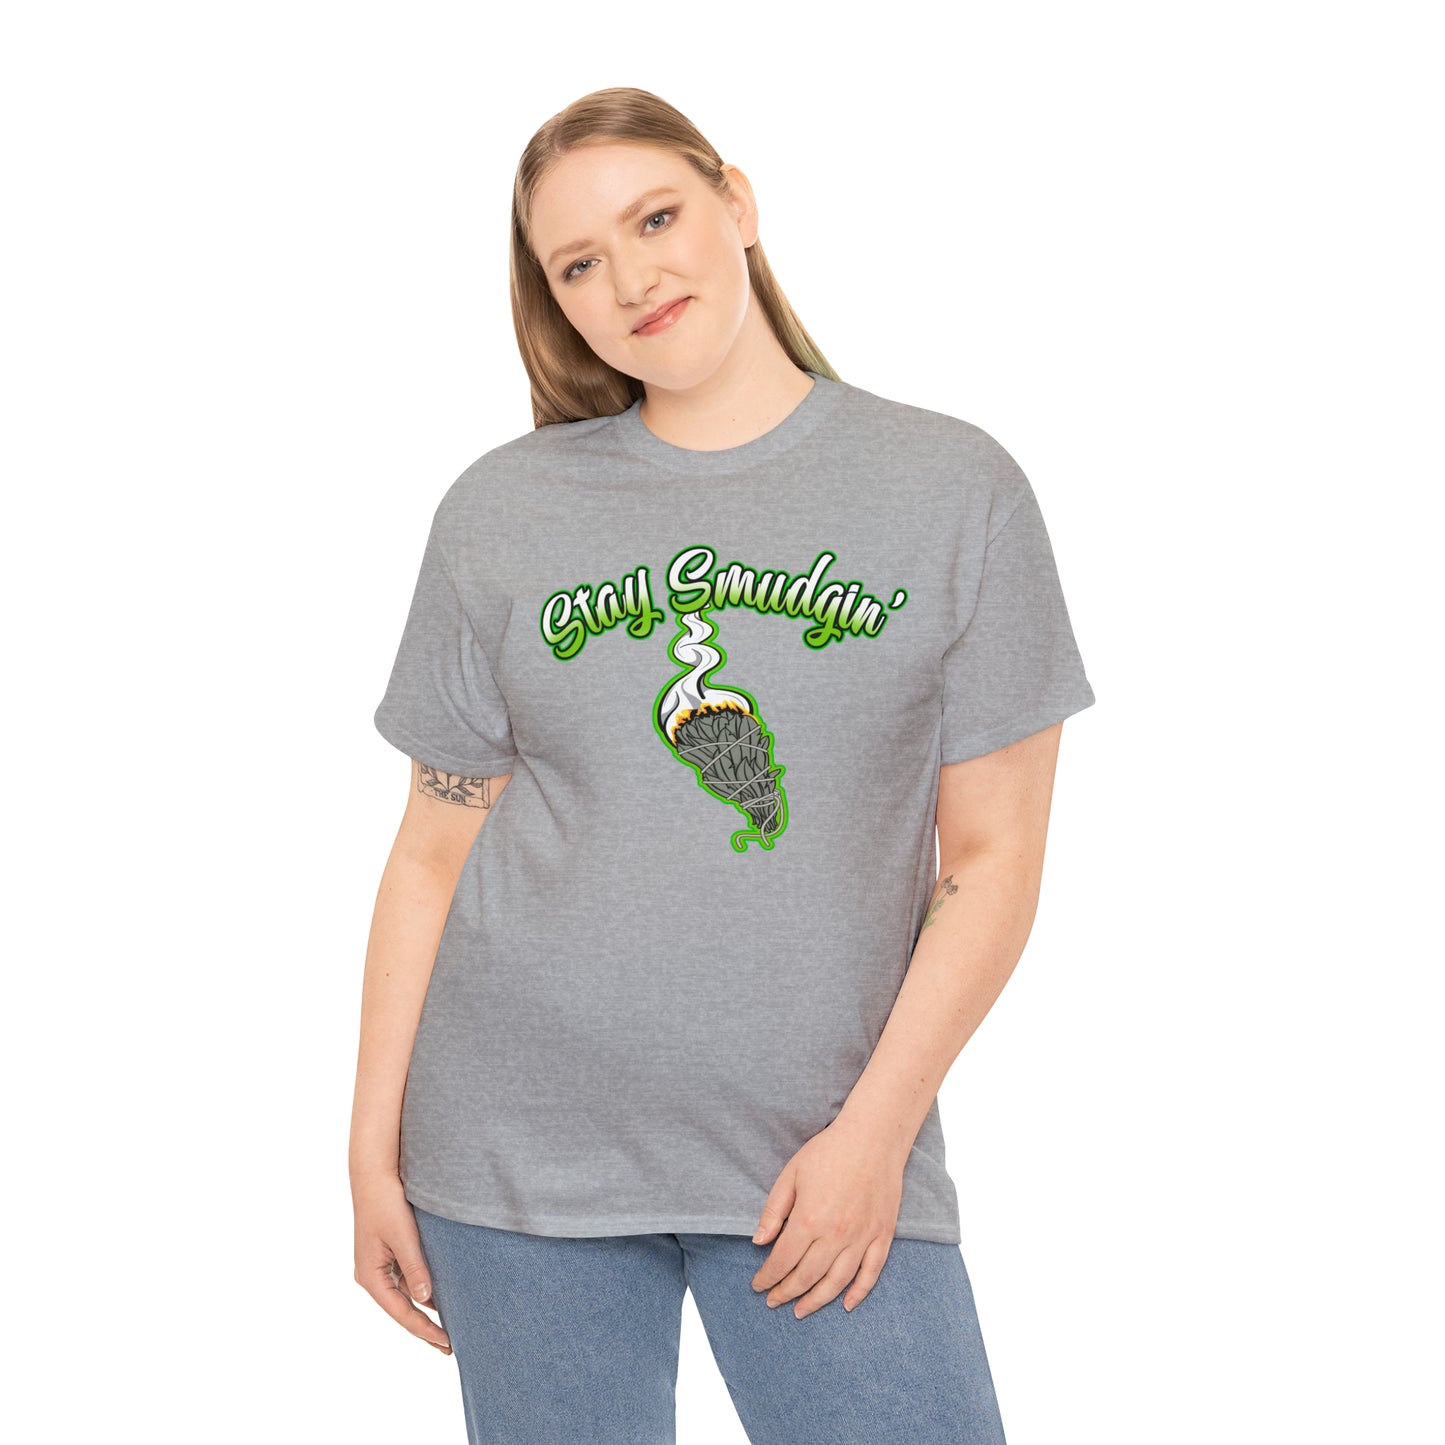 Stay Smudgin' T Shirt